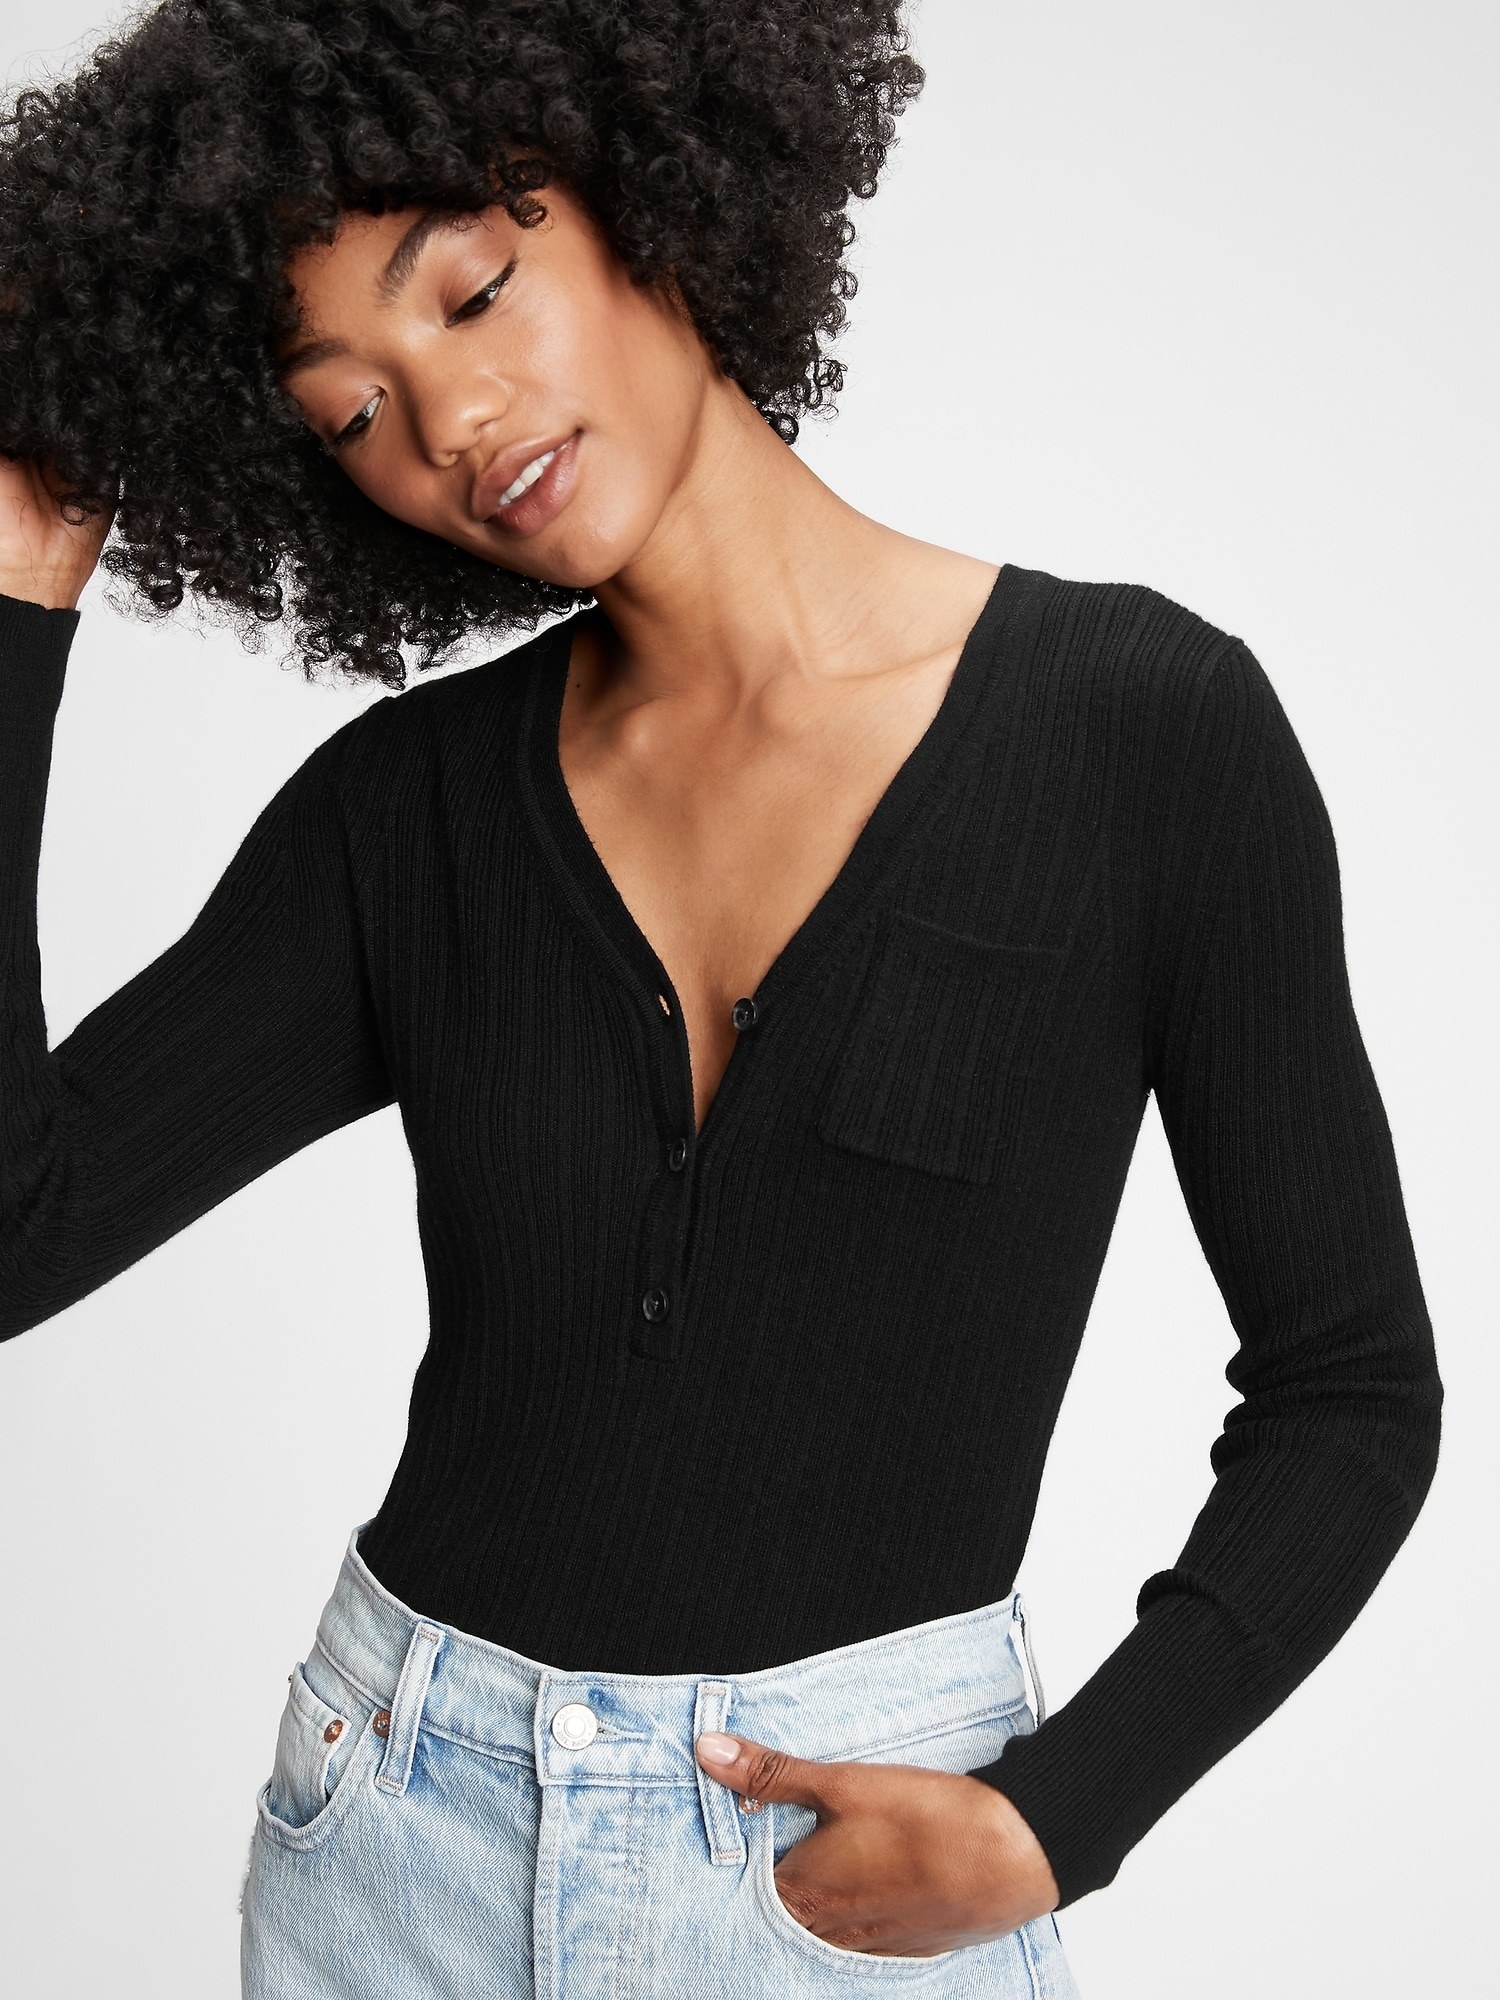 a model in the long sleeve black top